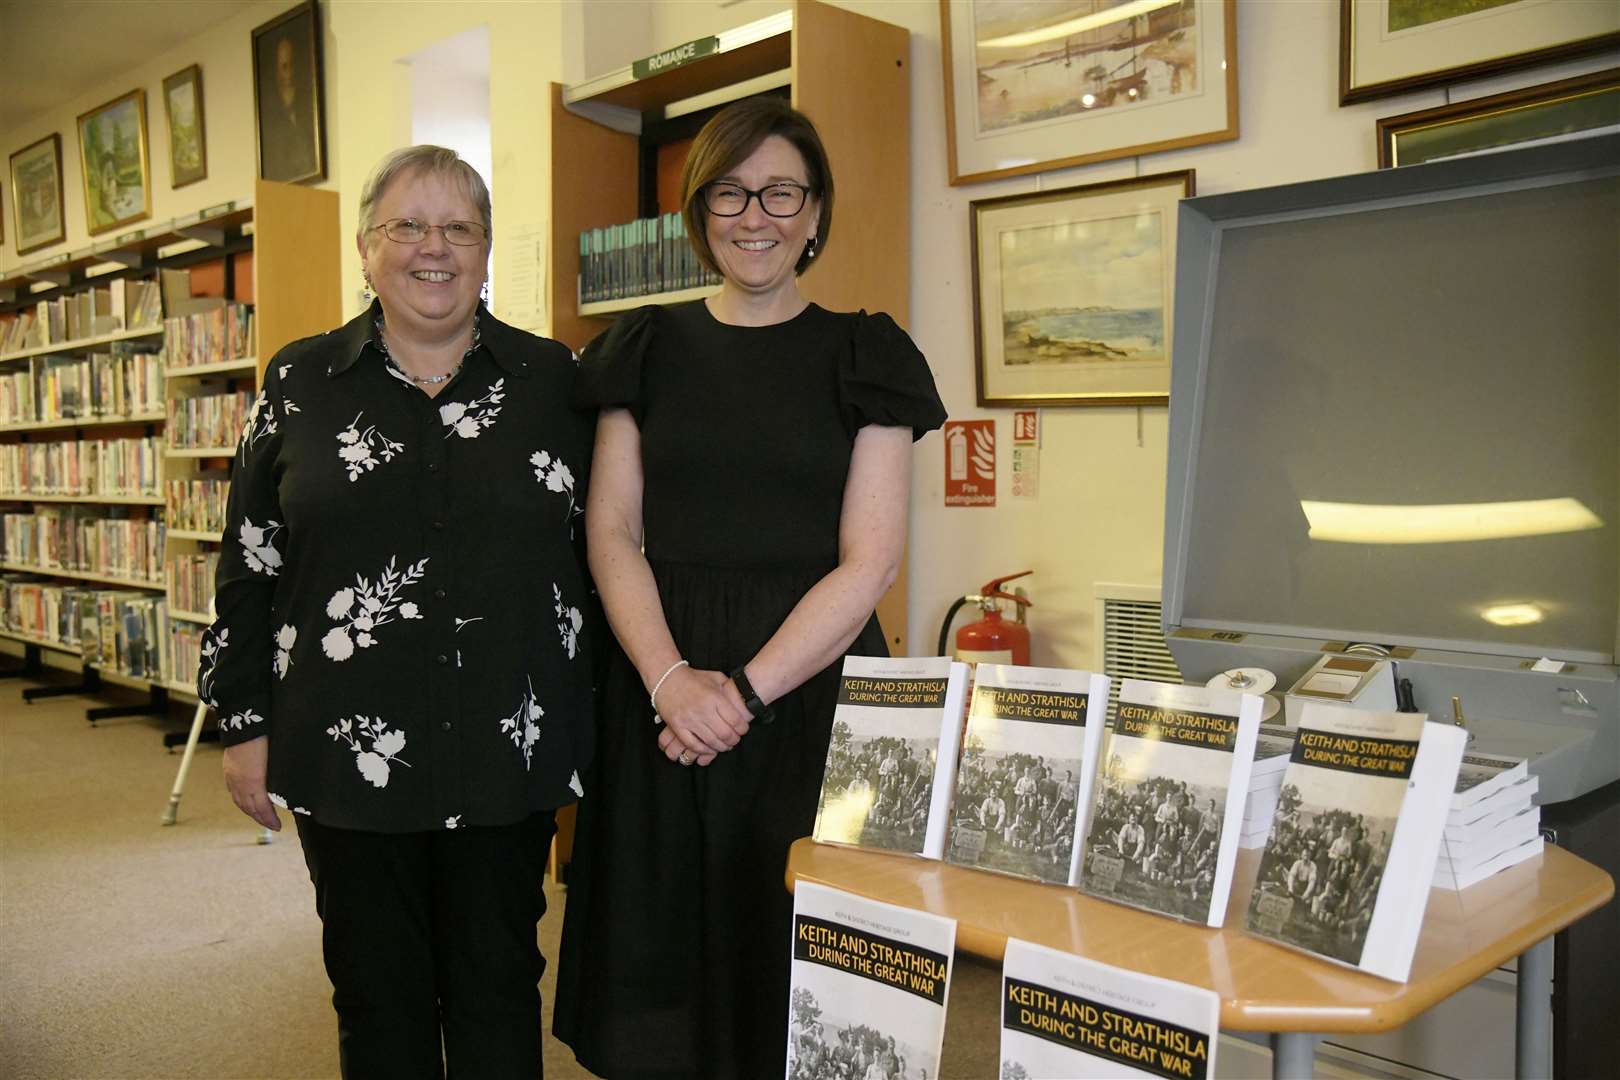 From left: Janice Meldrum (Coordinator for Keith and District Heritage Centre) and Esther Green at the book launch at Keith Library...Picture: Beth Taylor.